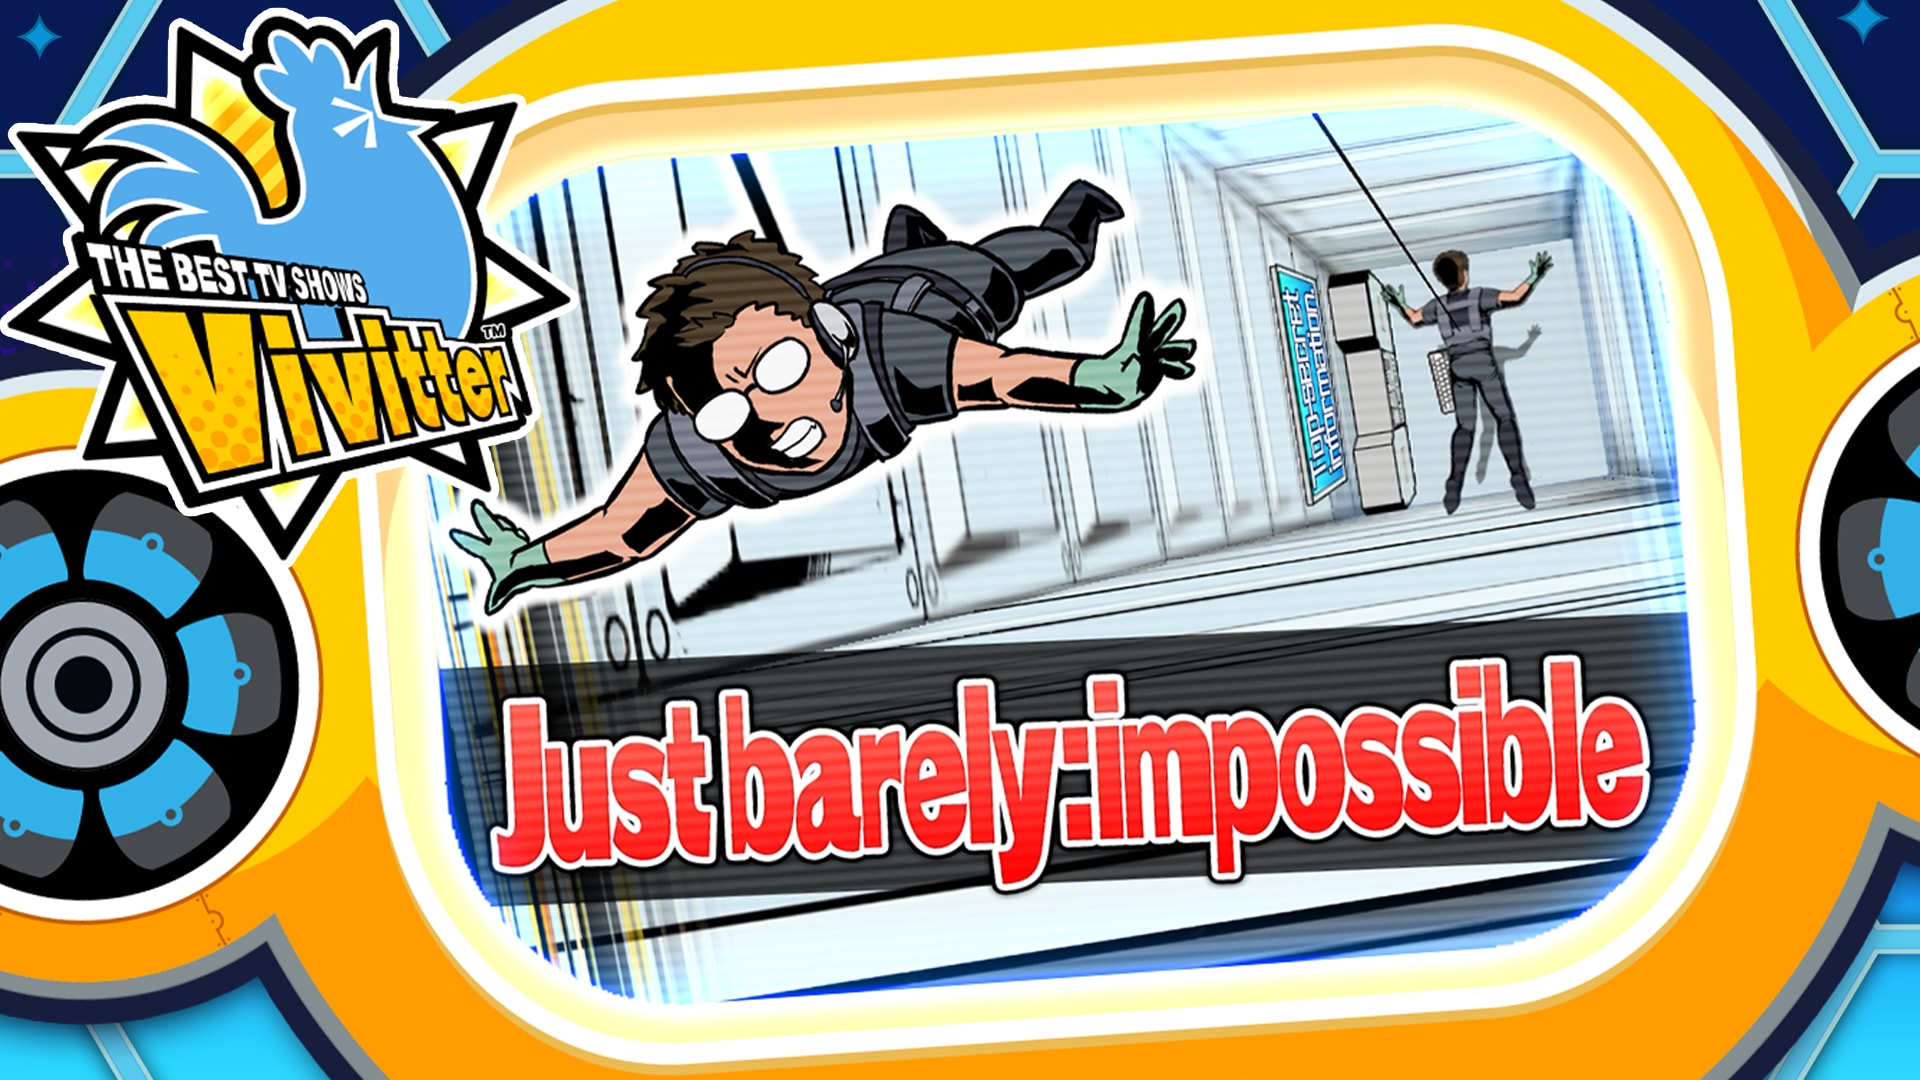 Additional mini-game "Just barely:impossible"